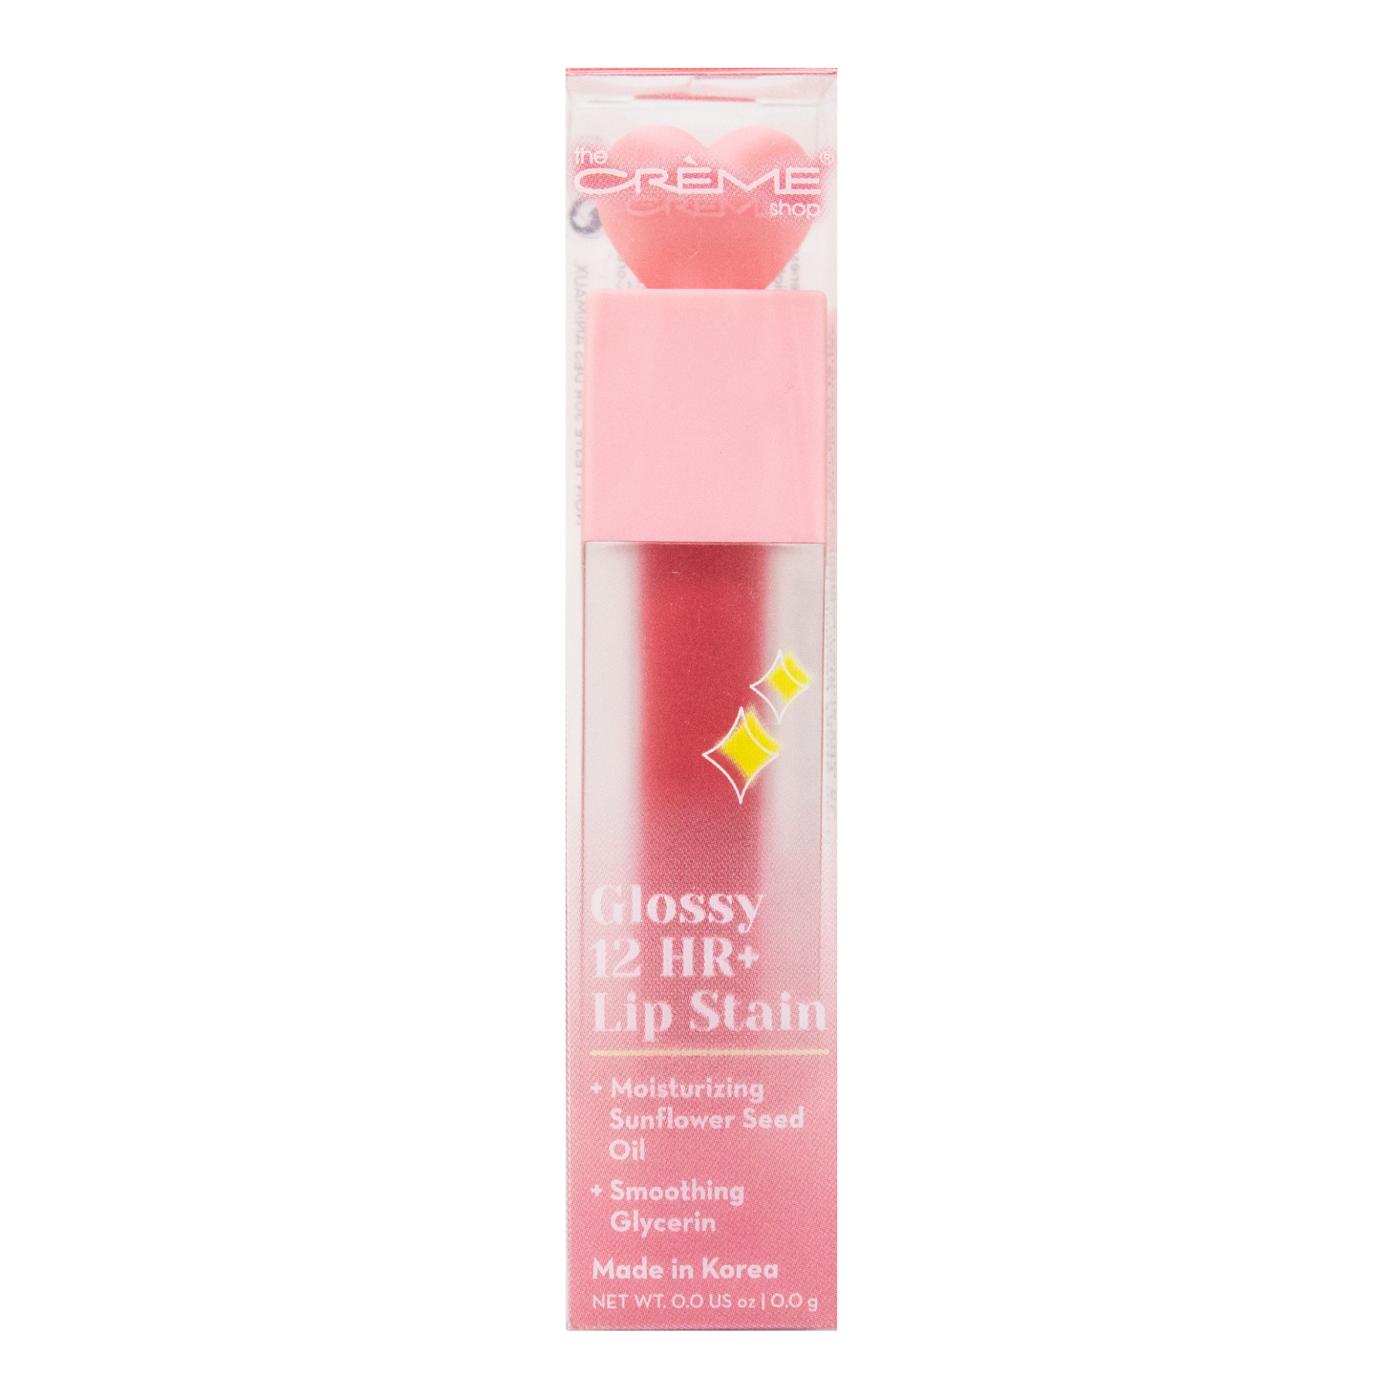 The Crème Shop Glossy 12 Hour Plus Lip Stain - Puppy Luv; image 1 of 2